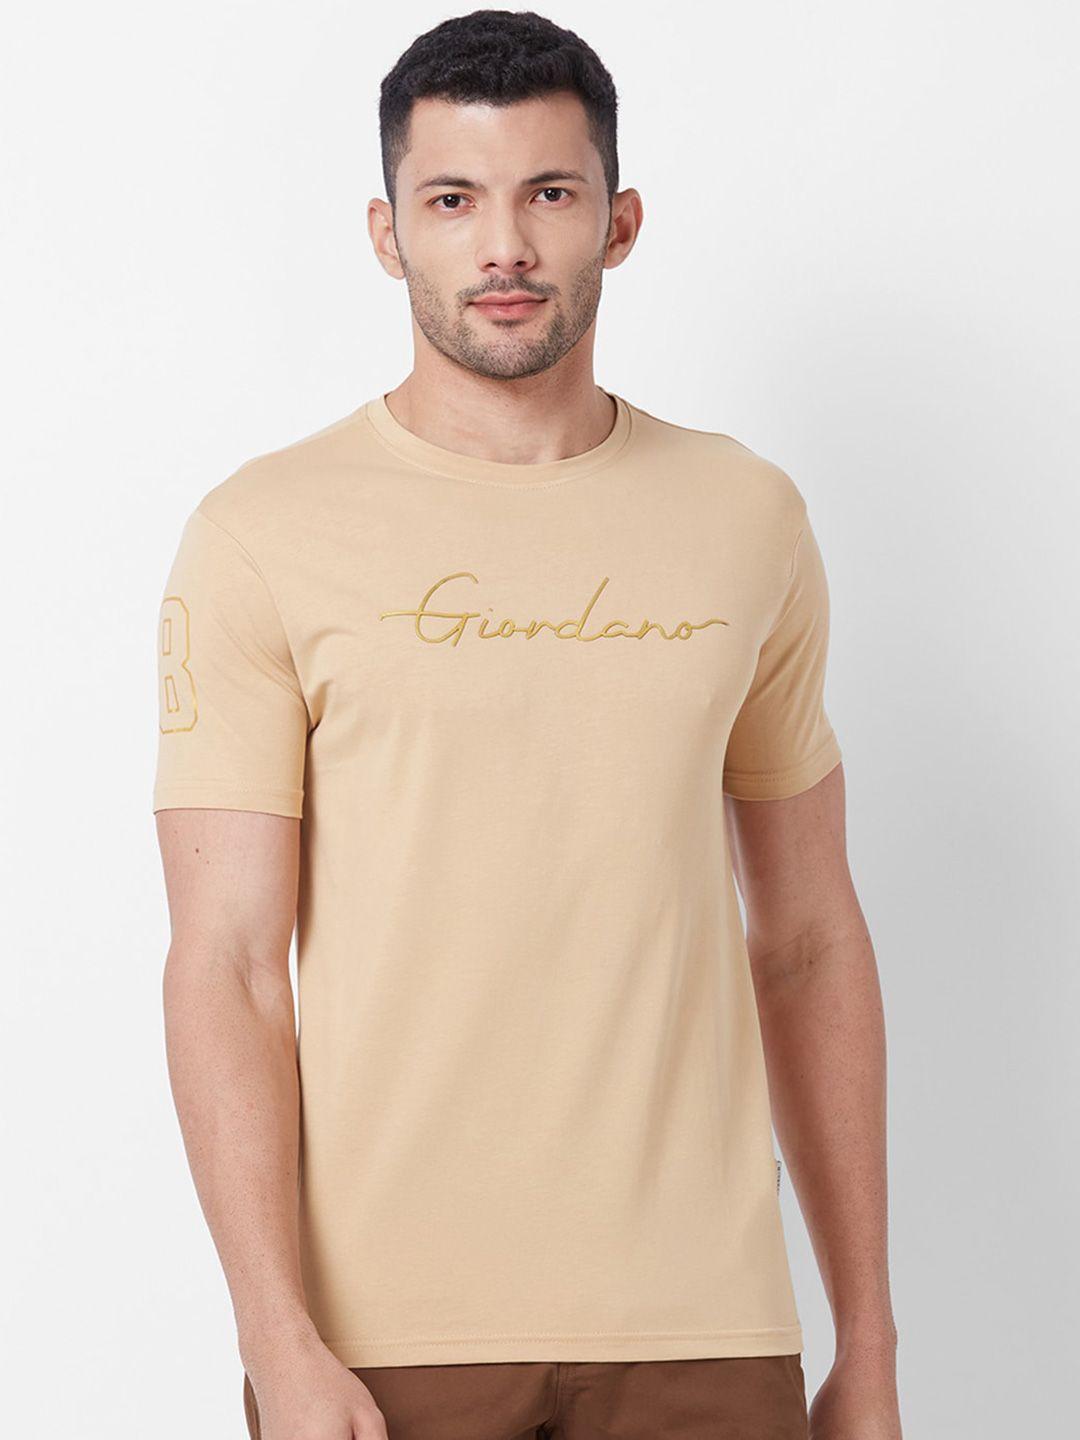 giordano-slim-fit-typography-printed-pure-cotton-t-shirt